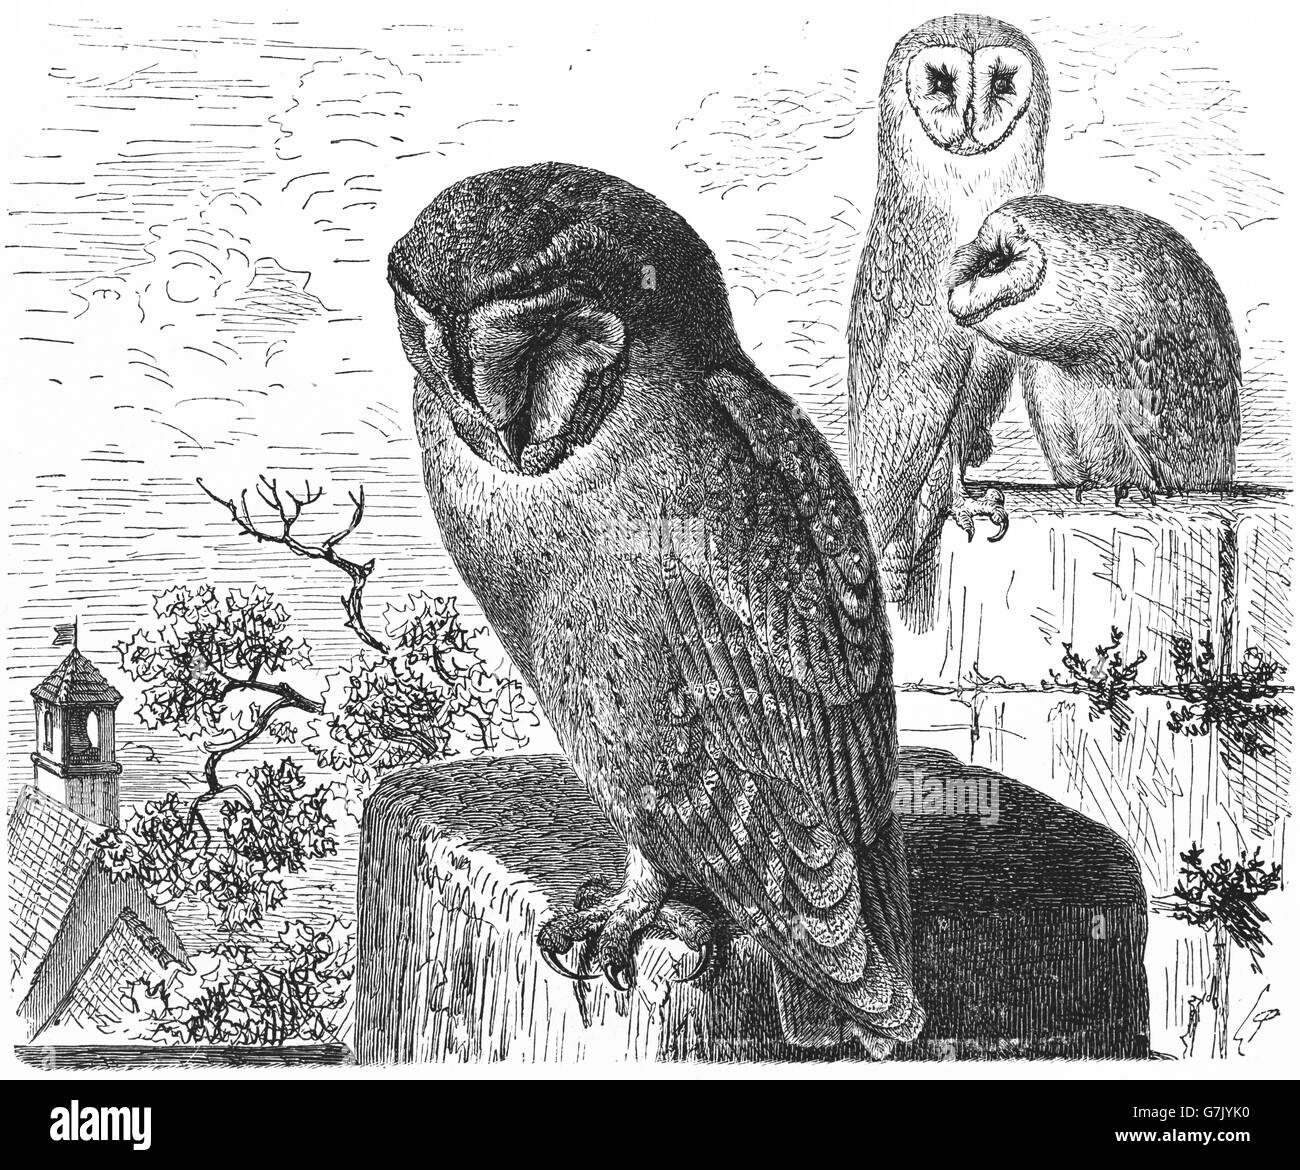 Barn owl, Tyto alba, illustration from book dated 1904 Stock Photo